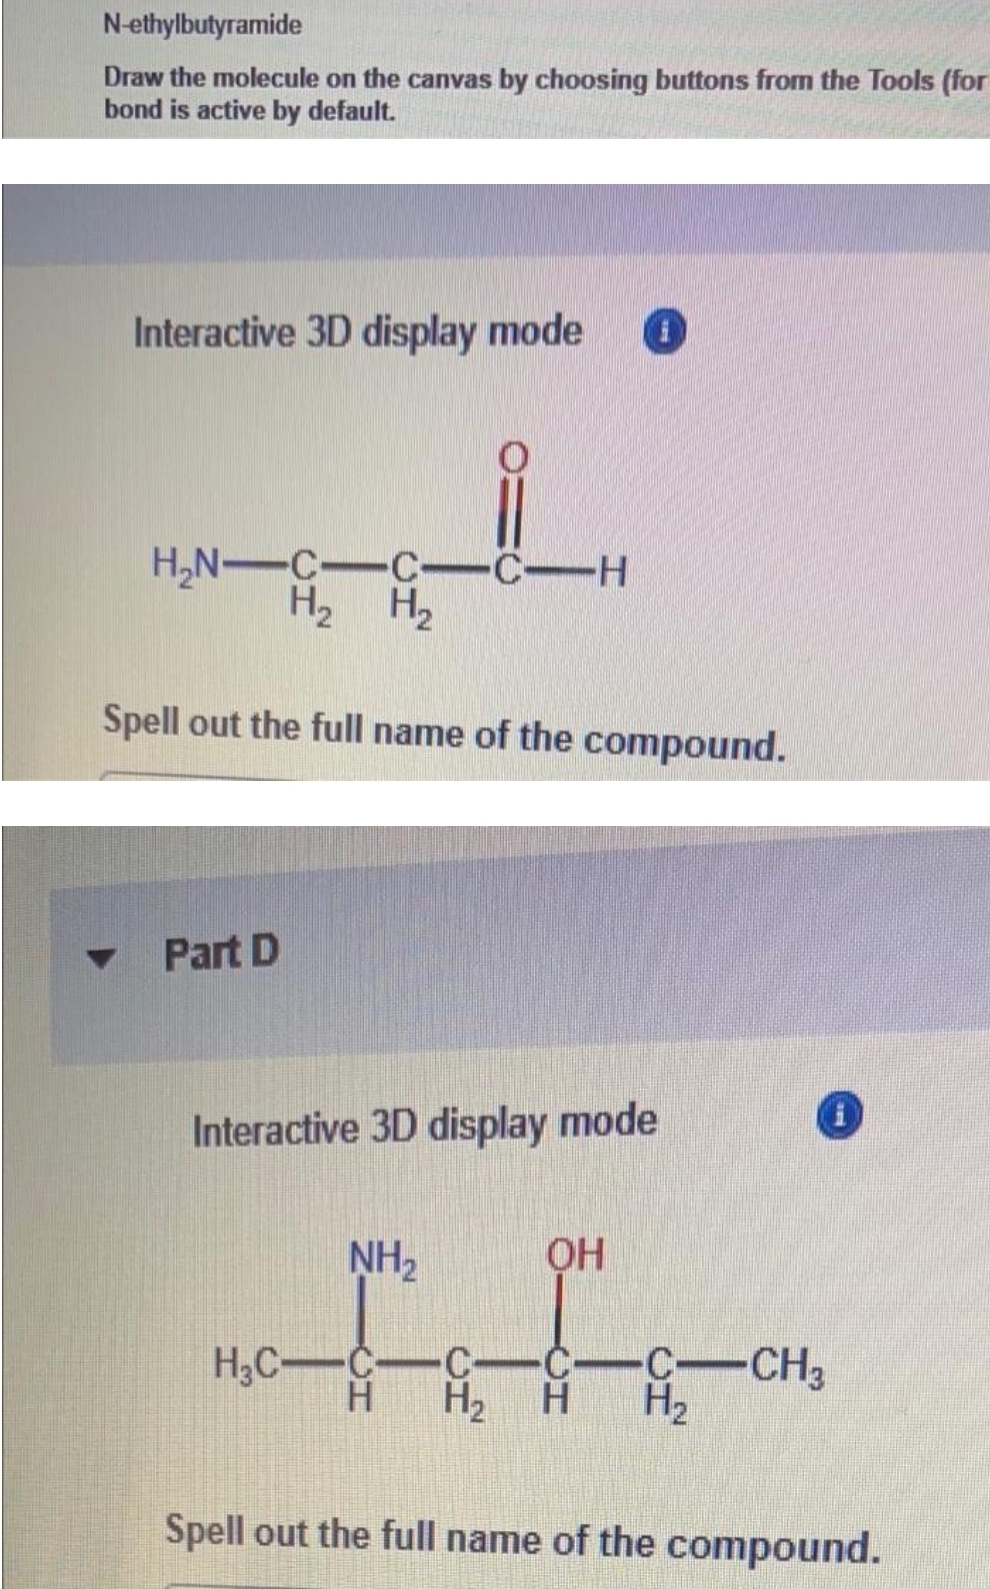 N-ethylbutyramide
Draw the molecule on the canvas by choosing buttons from the Tools (for
bond is active by default.
Interactive 3D display mode
H,N-C-C-C-H
H2 H2
Spell out the full name of the compound.
Part D
Interactive 3D display mode
NH2
H;C-C-
C-C
H.
H2
C-CH3
H2
Spell out the full name of the compound.
